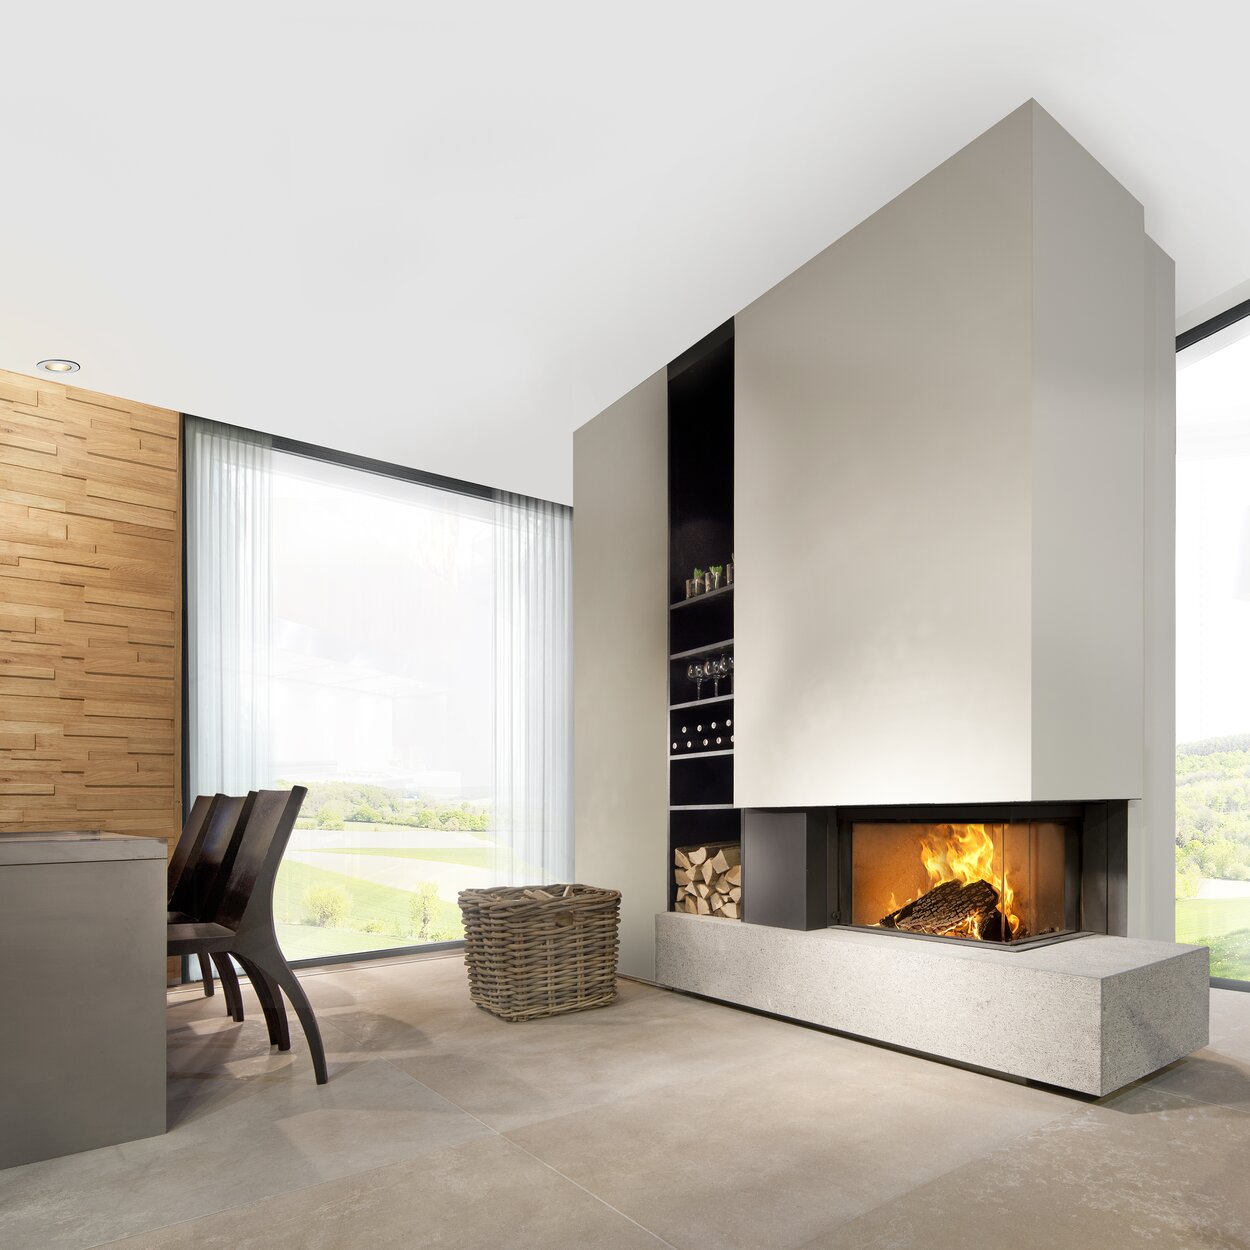 Wood fireplace W65/38C by Kalfire. The 2-sided fireplace (right) is built into a beige-coloured partition wall and stands on a modern bench made of natural stone